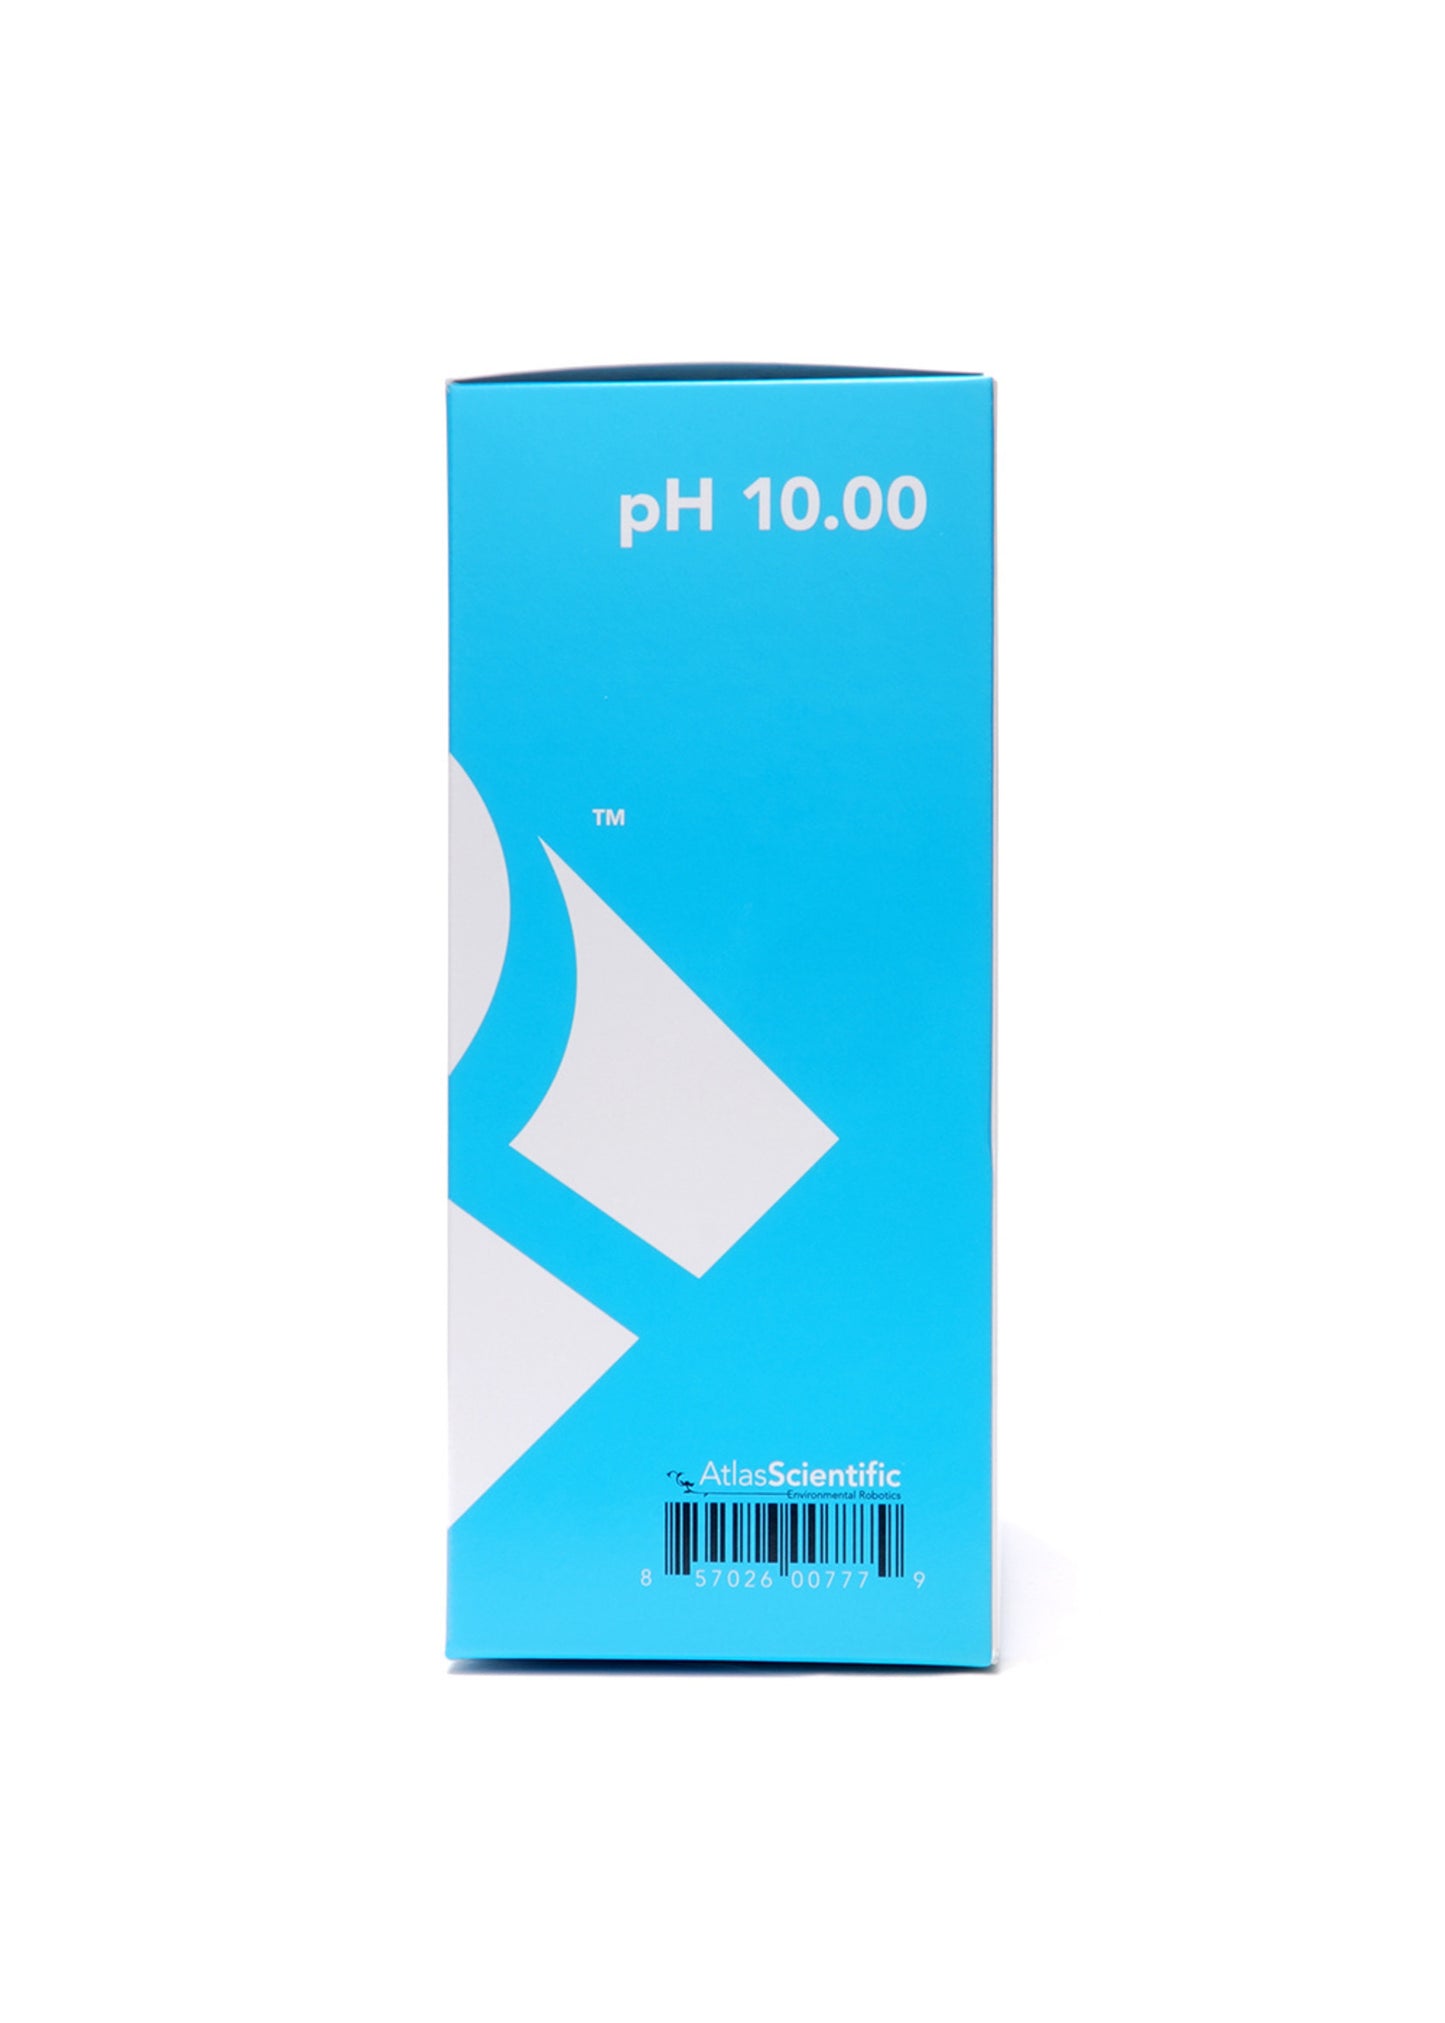 pH 10.00 Calibration Solution Pouches (Box of 25)